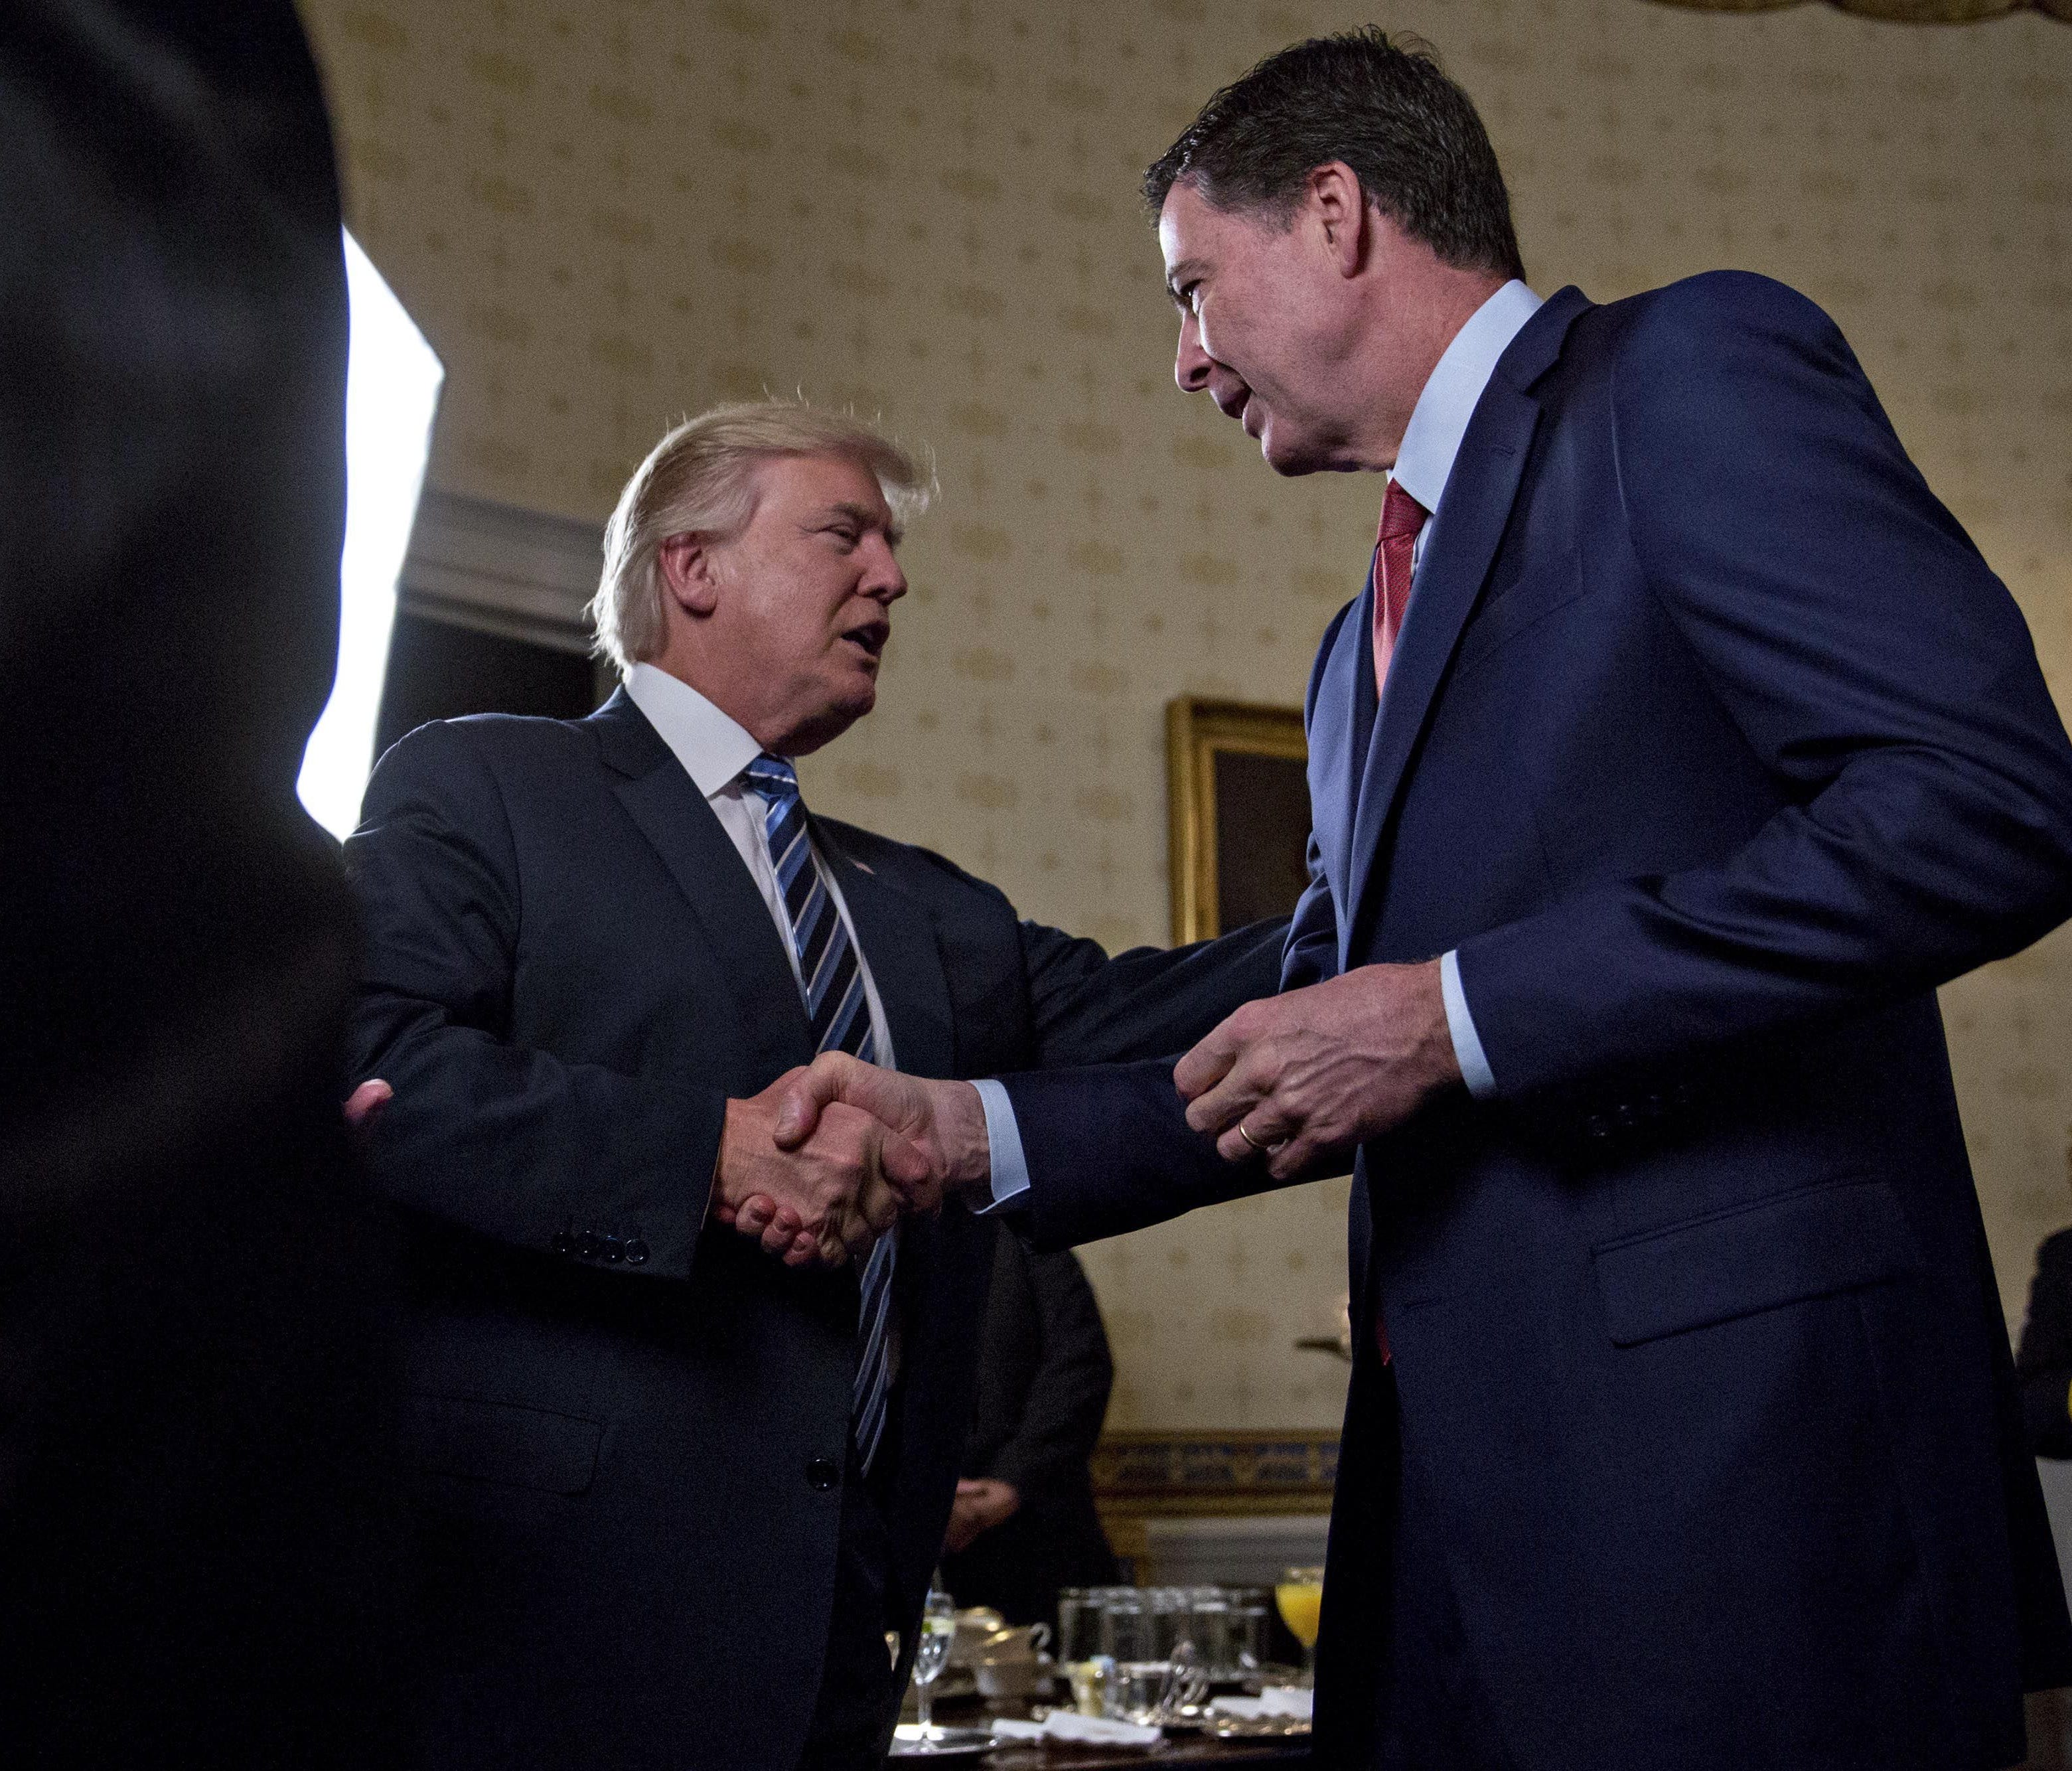 President Trump shakes hands with James Comey during an Inaugural Law Enforcement Officers and First Responders Reception in the Blue Room of the White House on Jan. 22, 2017.